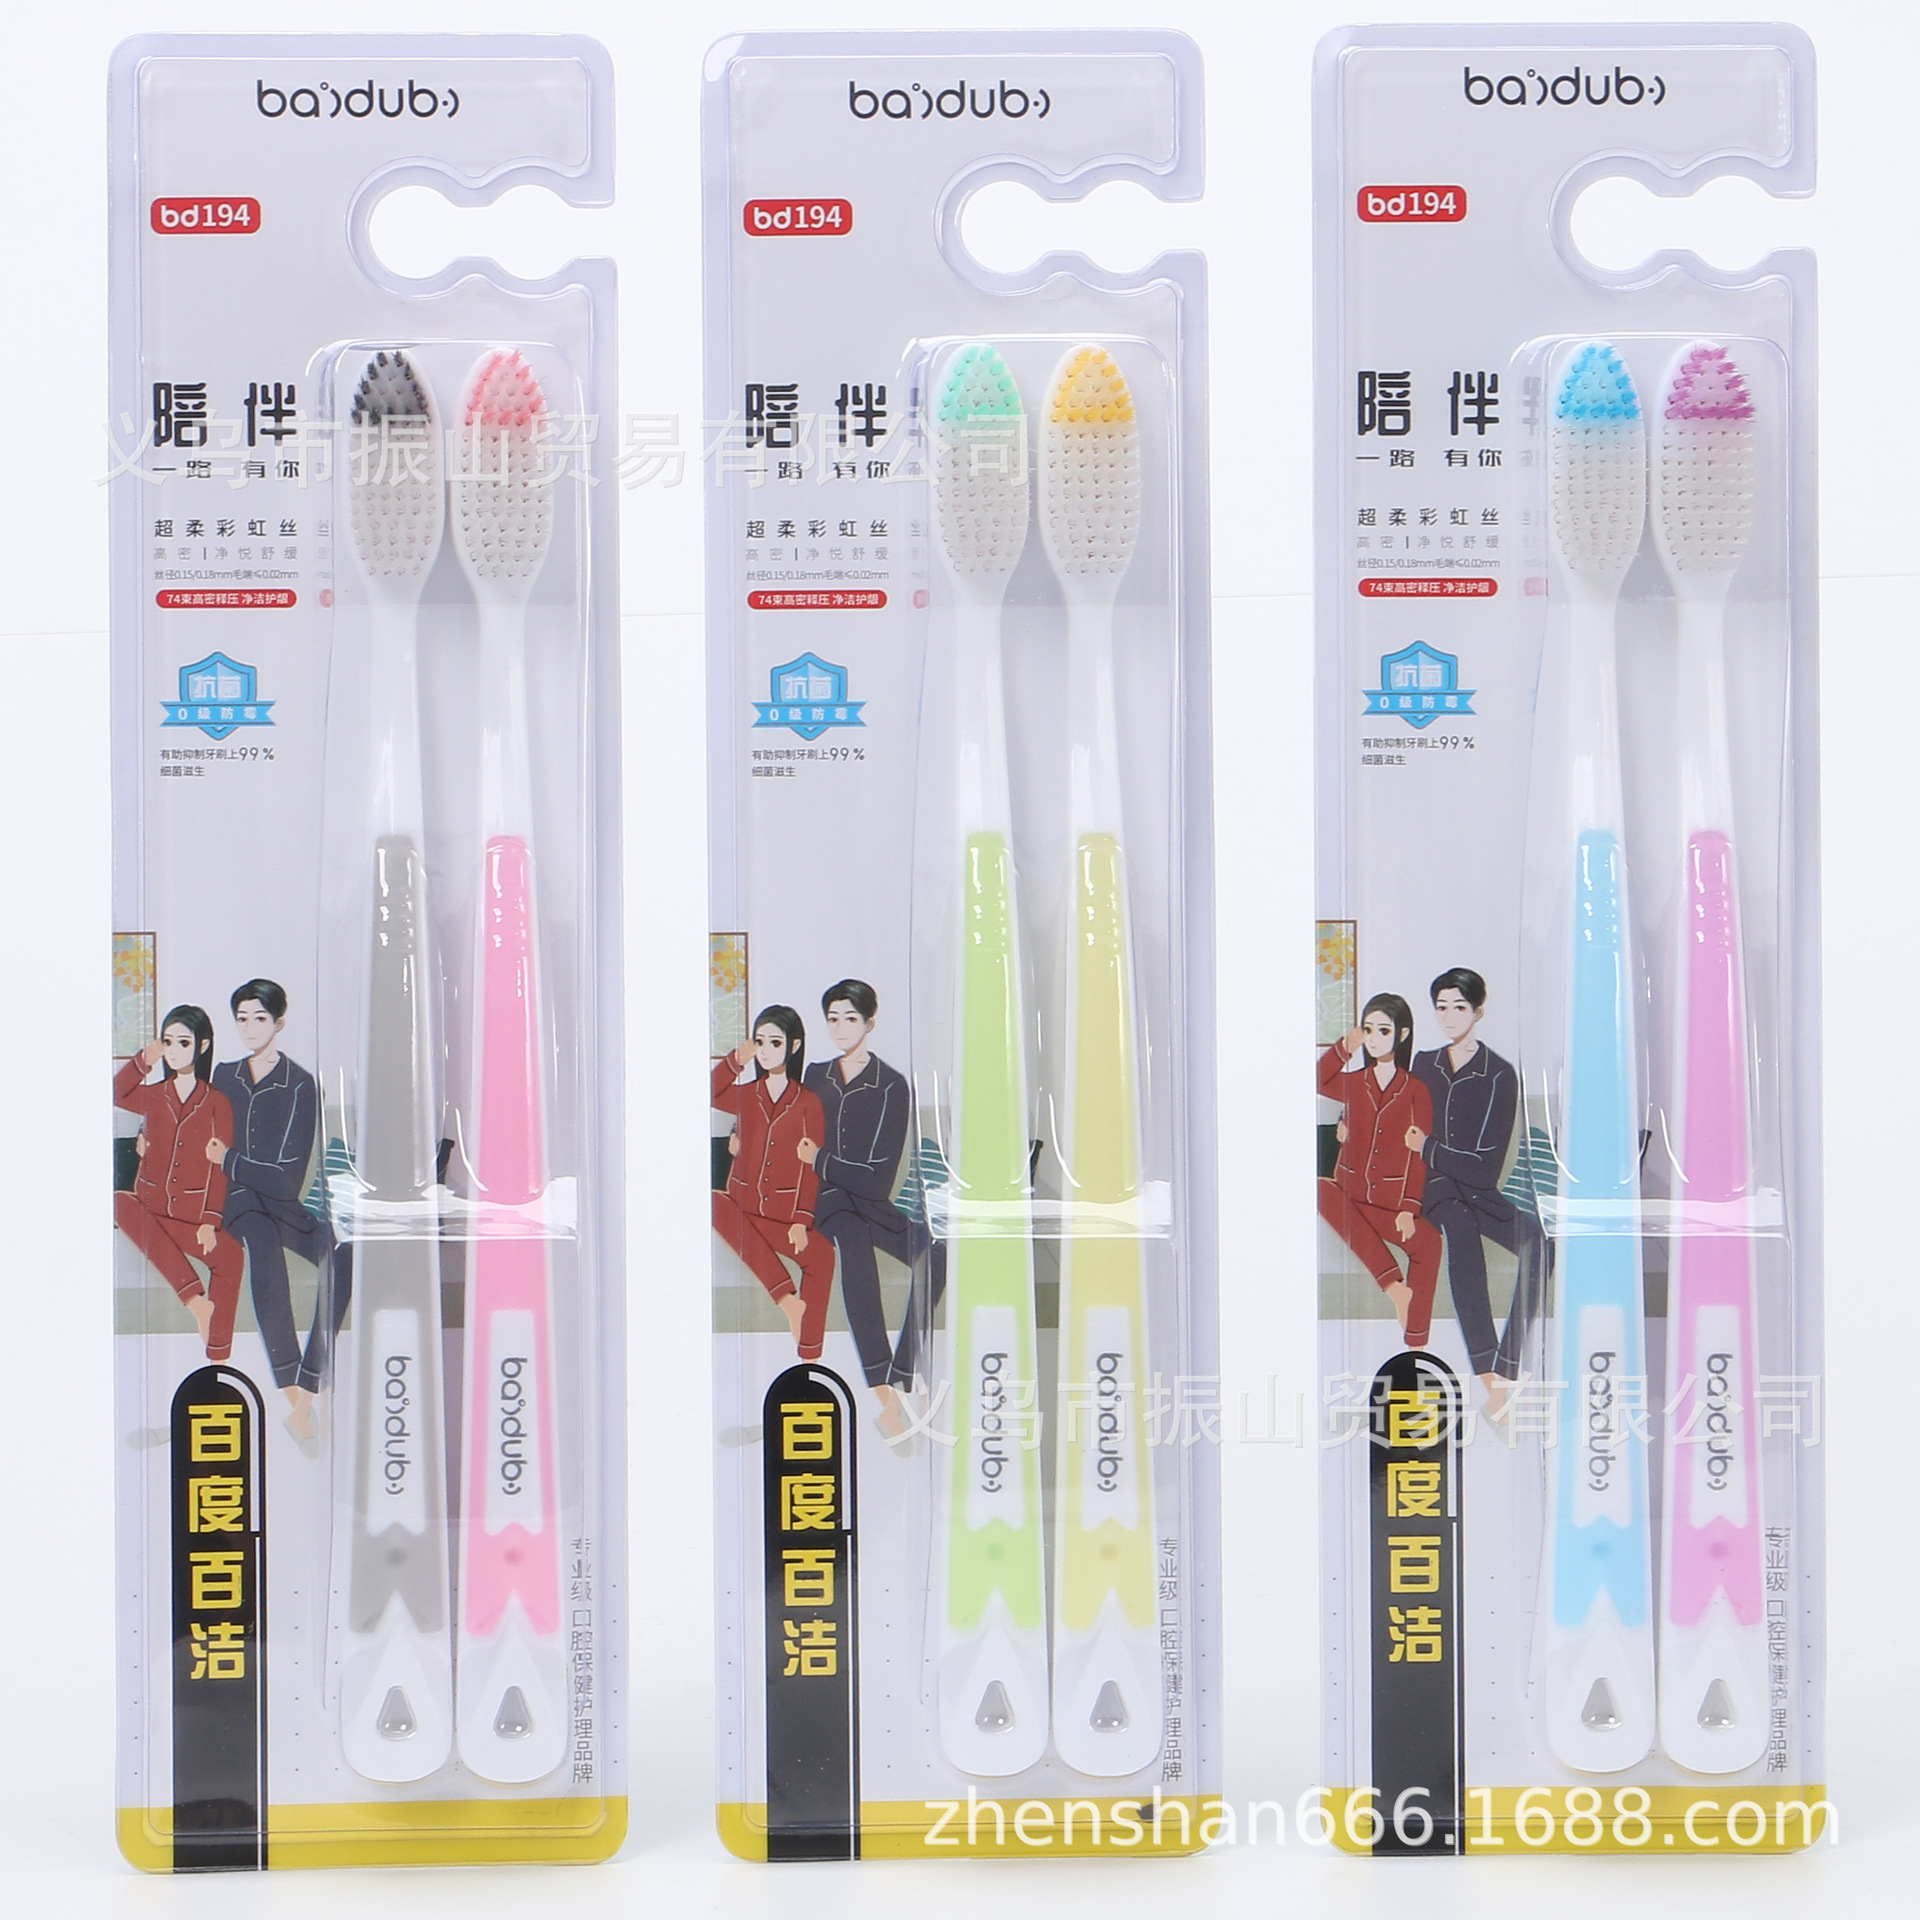 baidu baijie 194 accompany all the way you have a super soft rainbow silk 75 bundles of qingyue soothing soft hair toothbrush